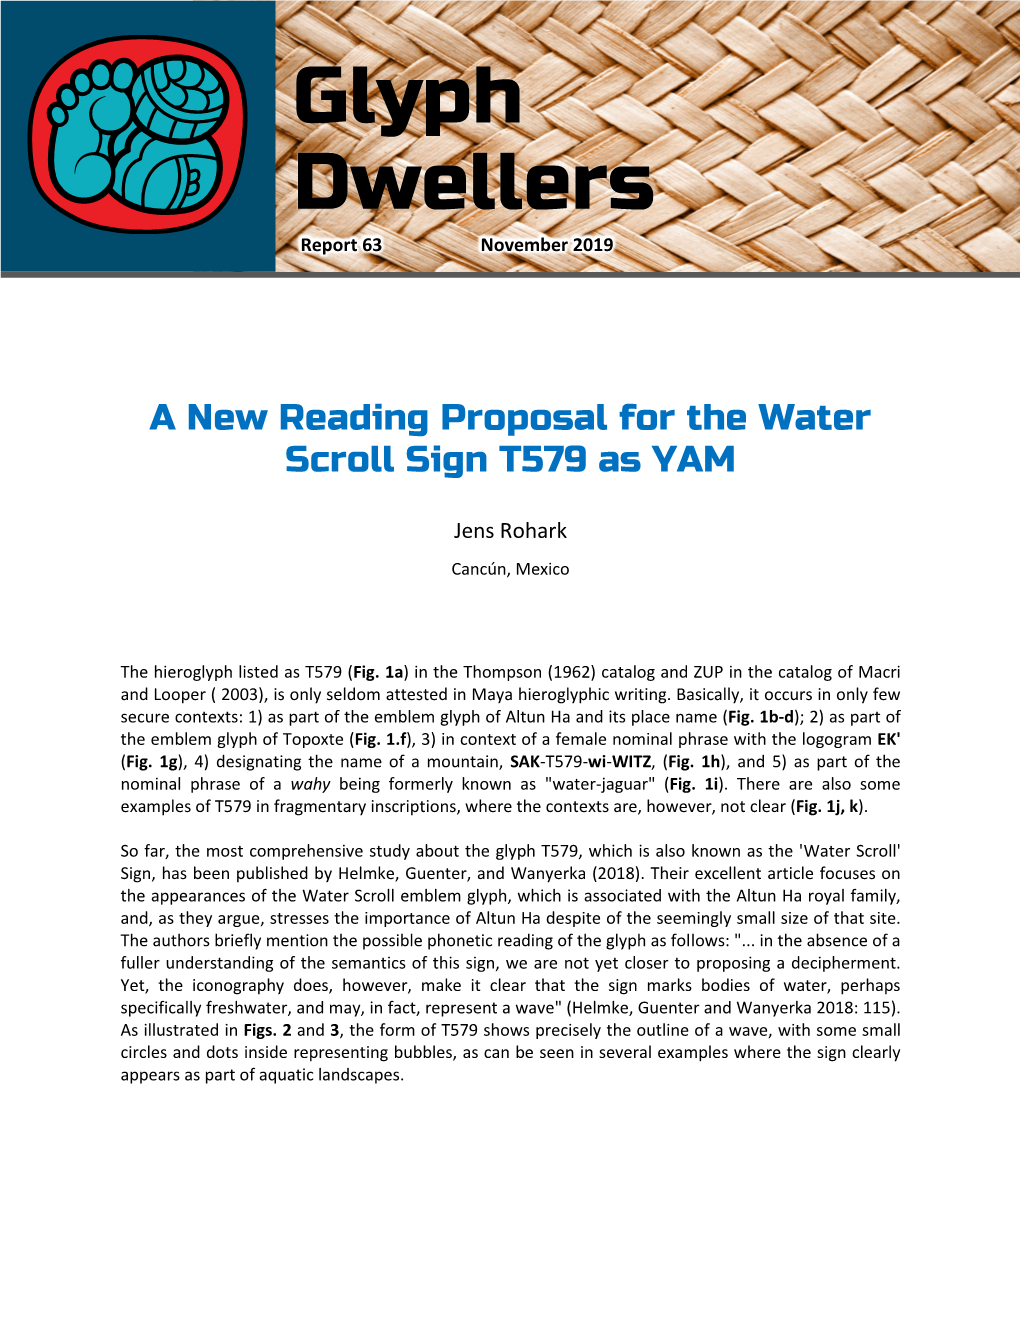 A New Reading Proposal for the Water Scroll Sign T579 As YAM